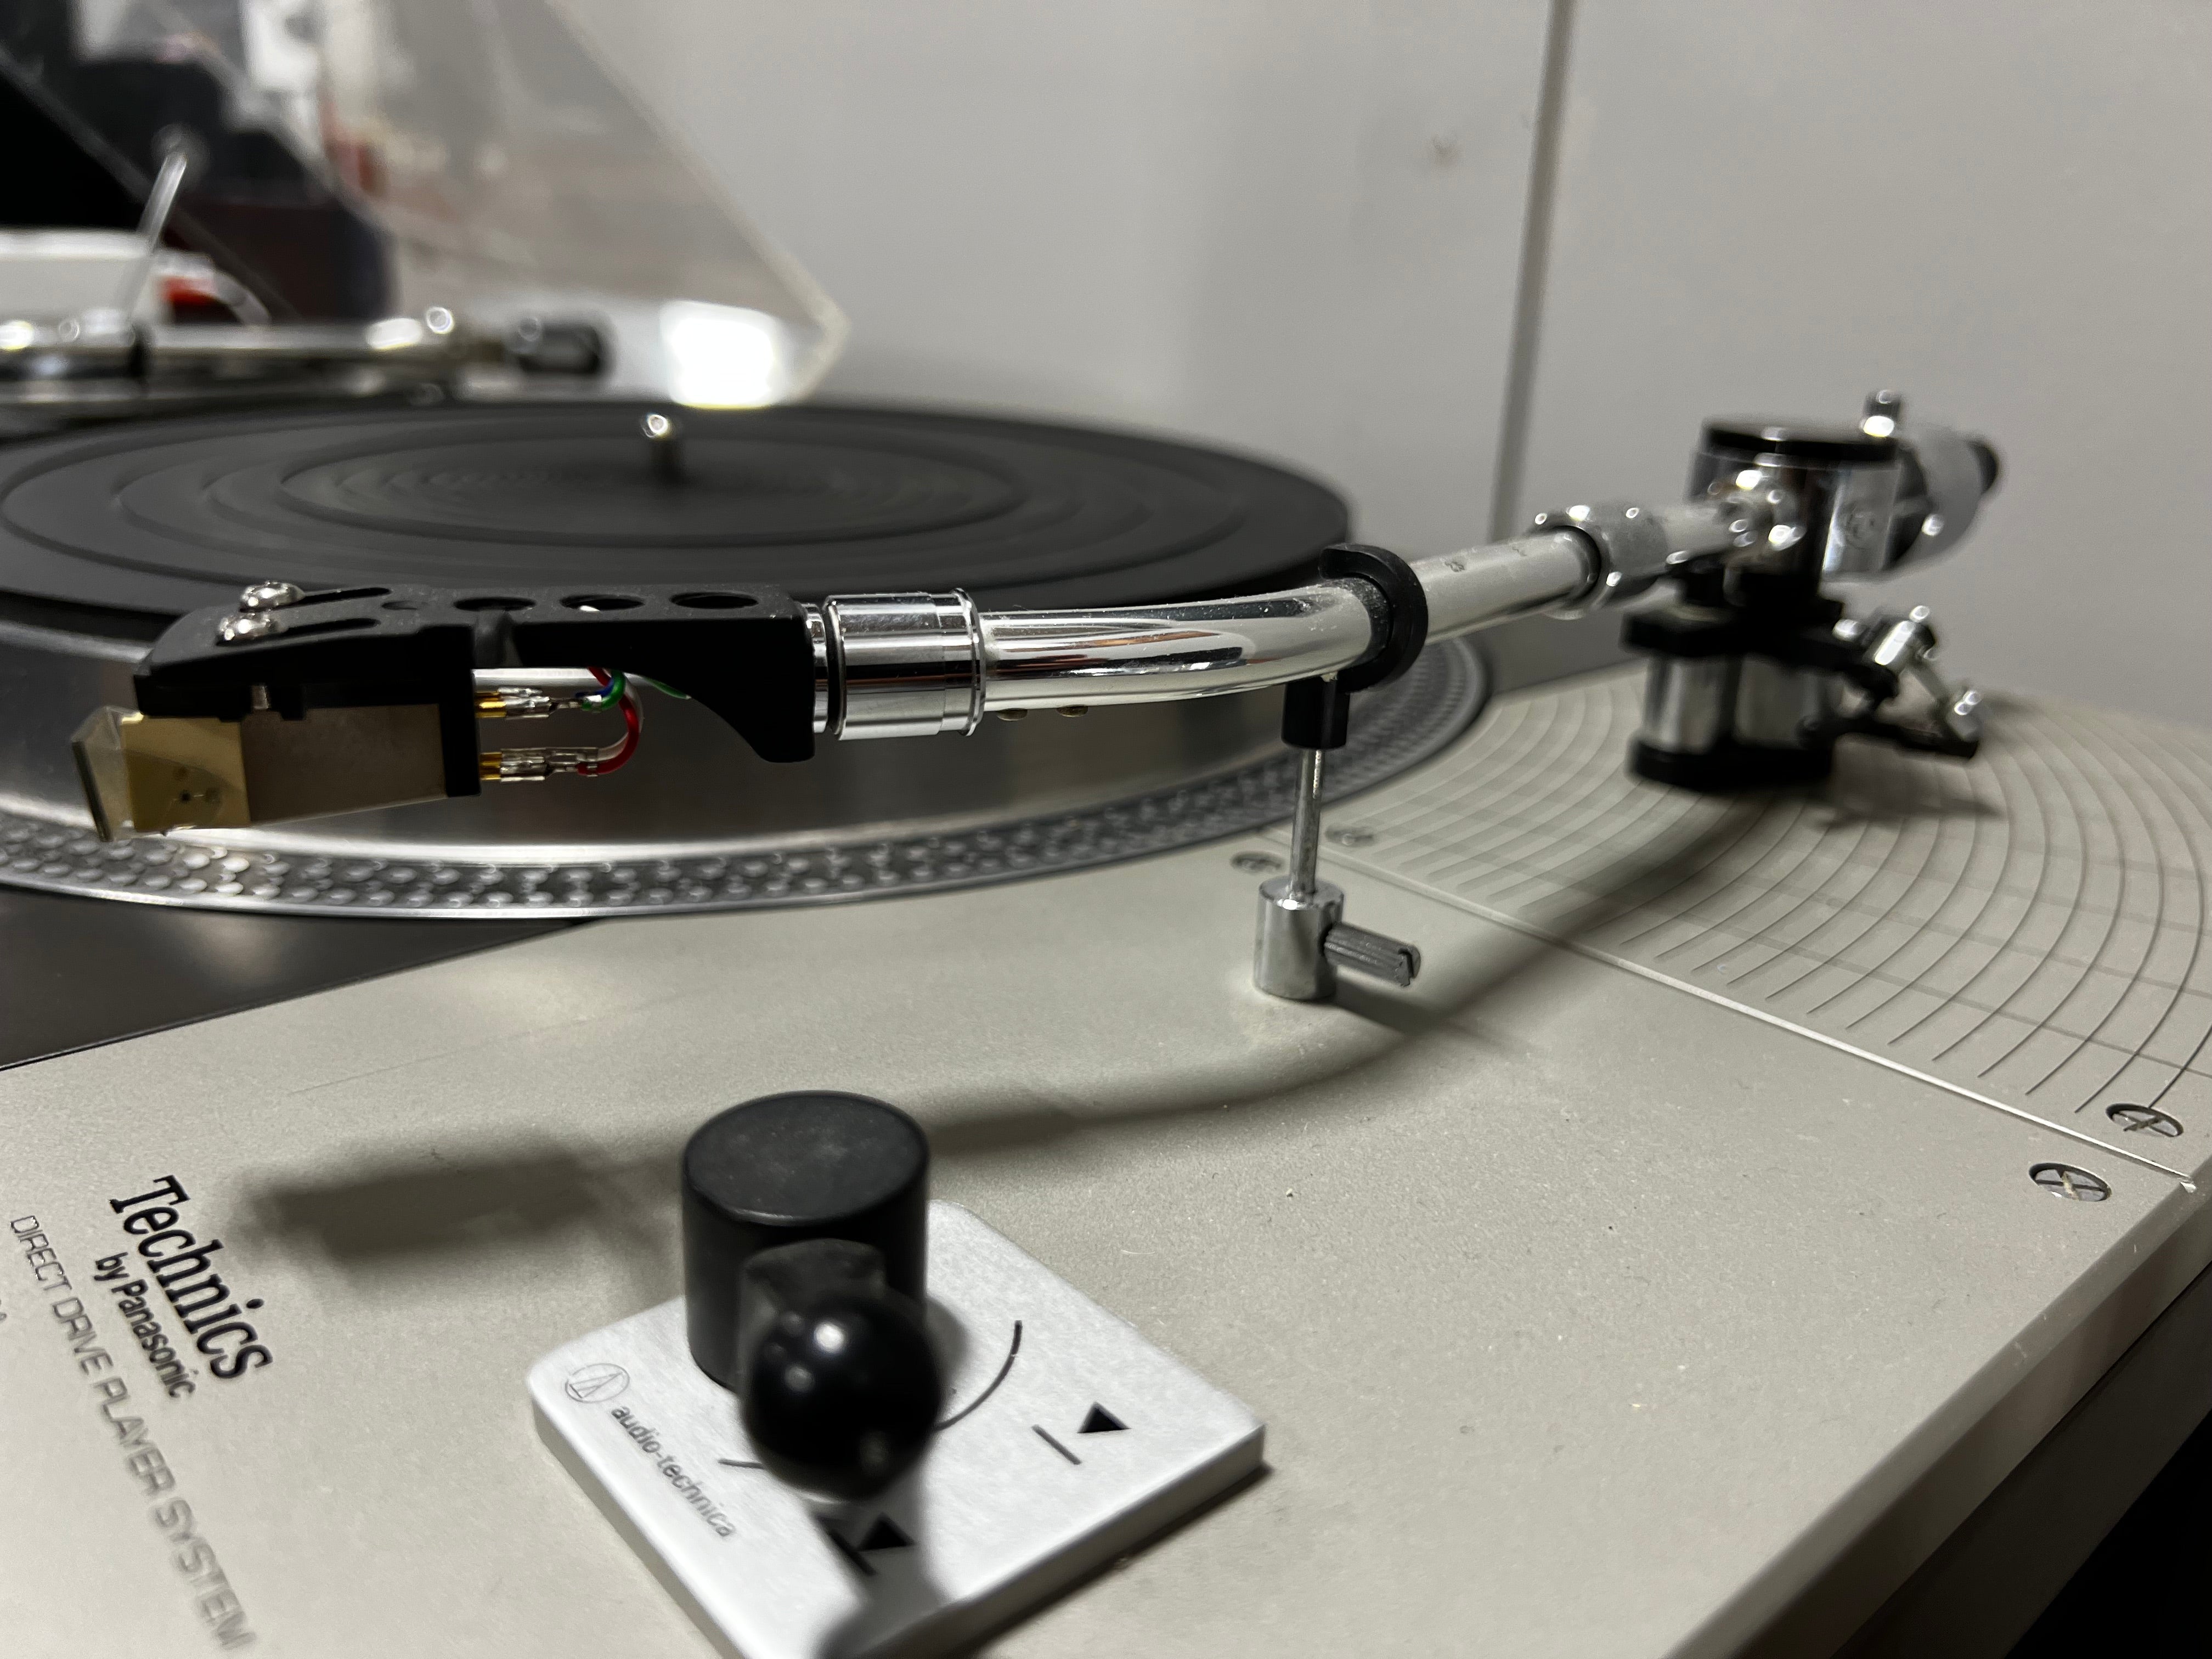 Technics SL-110A, Reference Turntable